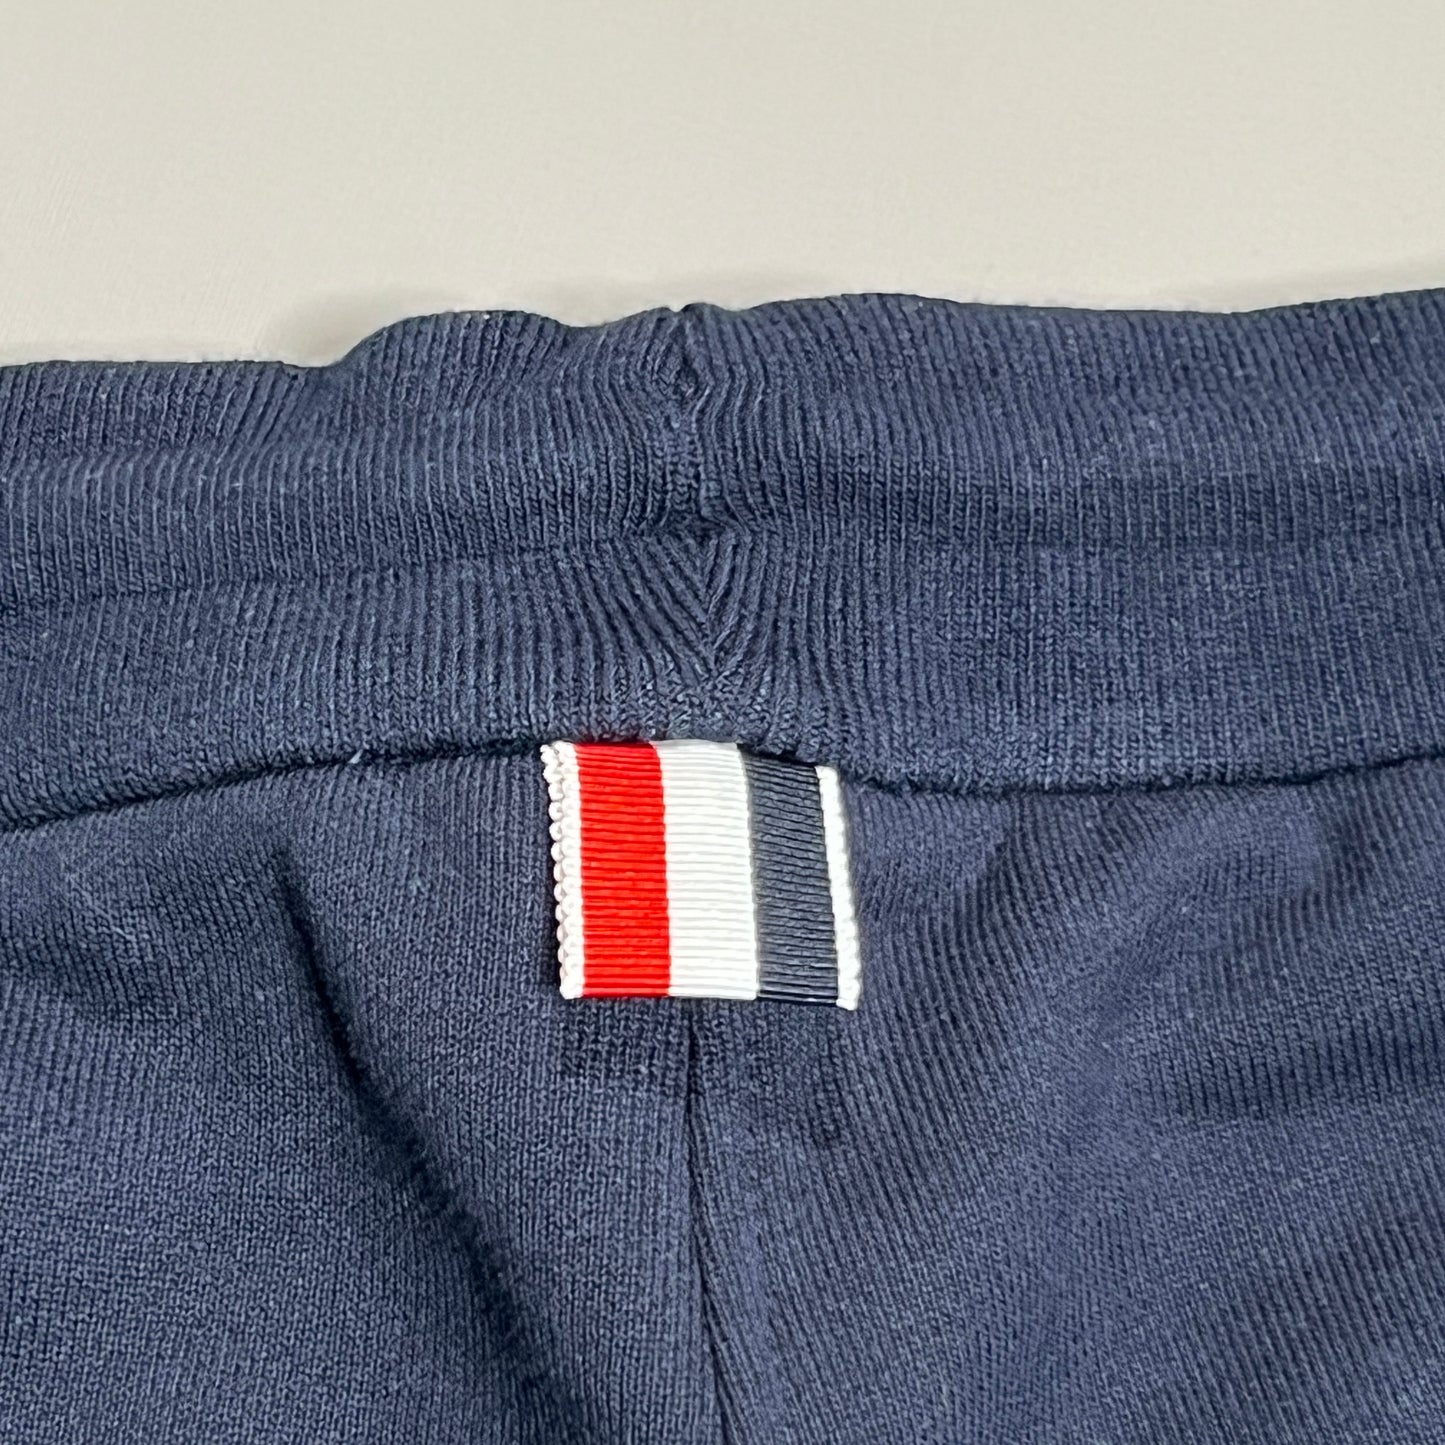 THOM BROWNE Classic Sweat pants w/Engineered 4 Bar Loop Back Navy Size 3 (New)